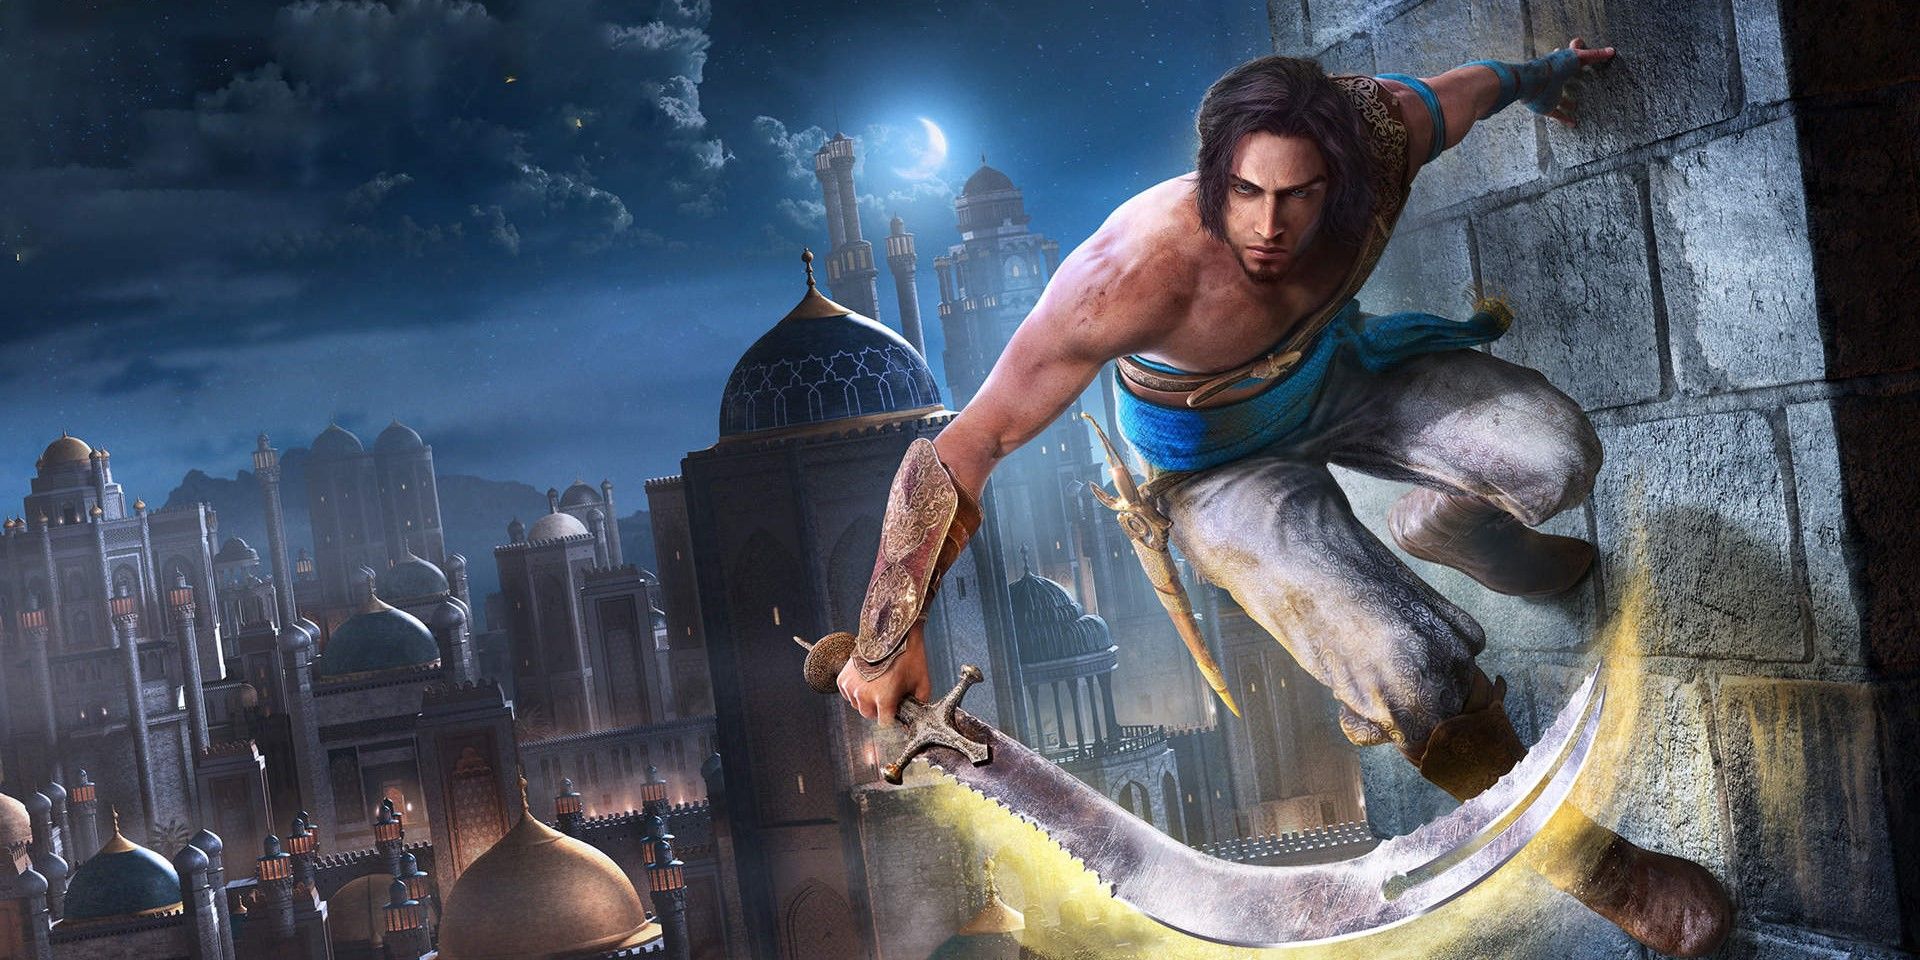 Prince of Persia Remake Not Dead, But Ubisoft Refunding Preorders